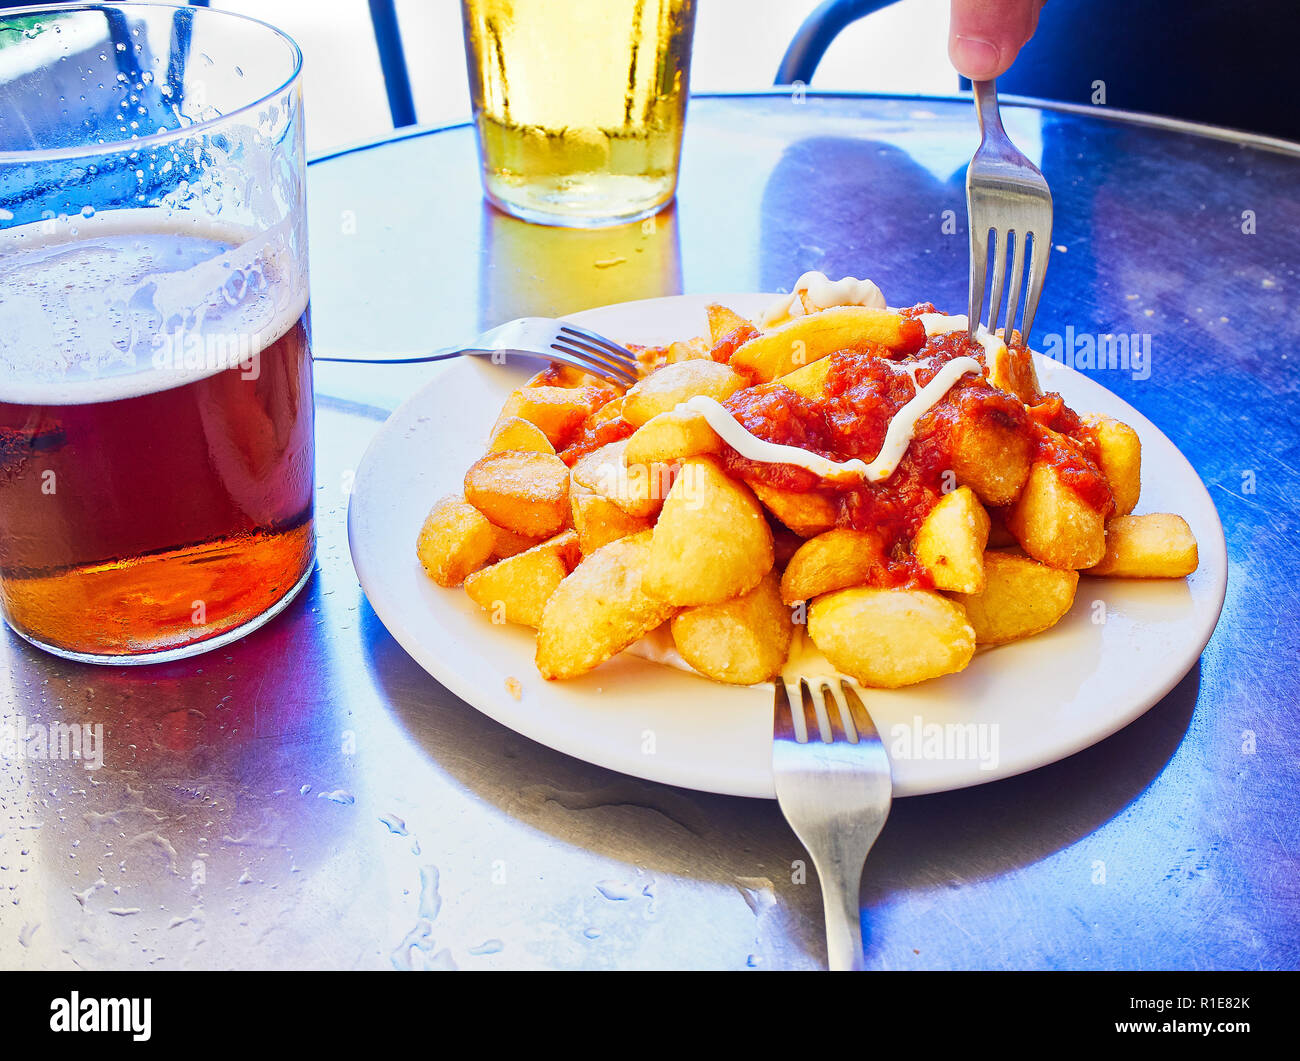 A portion of Patatas Bravas over a metallic table. Fried potatoes topped with spicy sauce, one of the most common typical Spanish tapas. Stock Photo